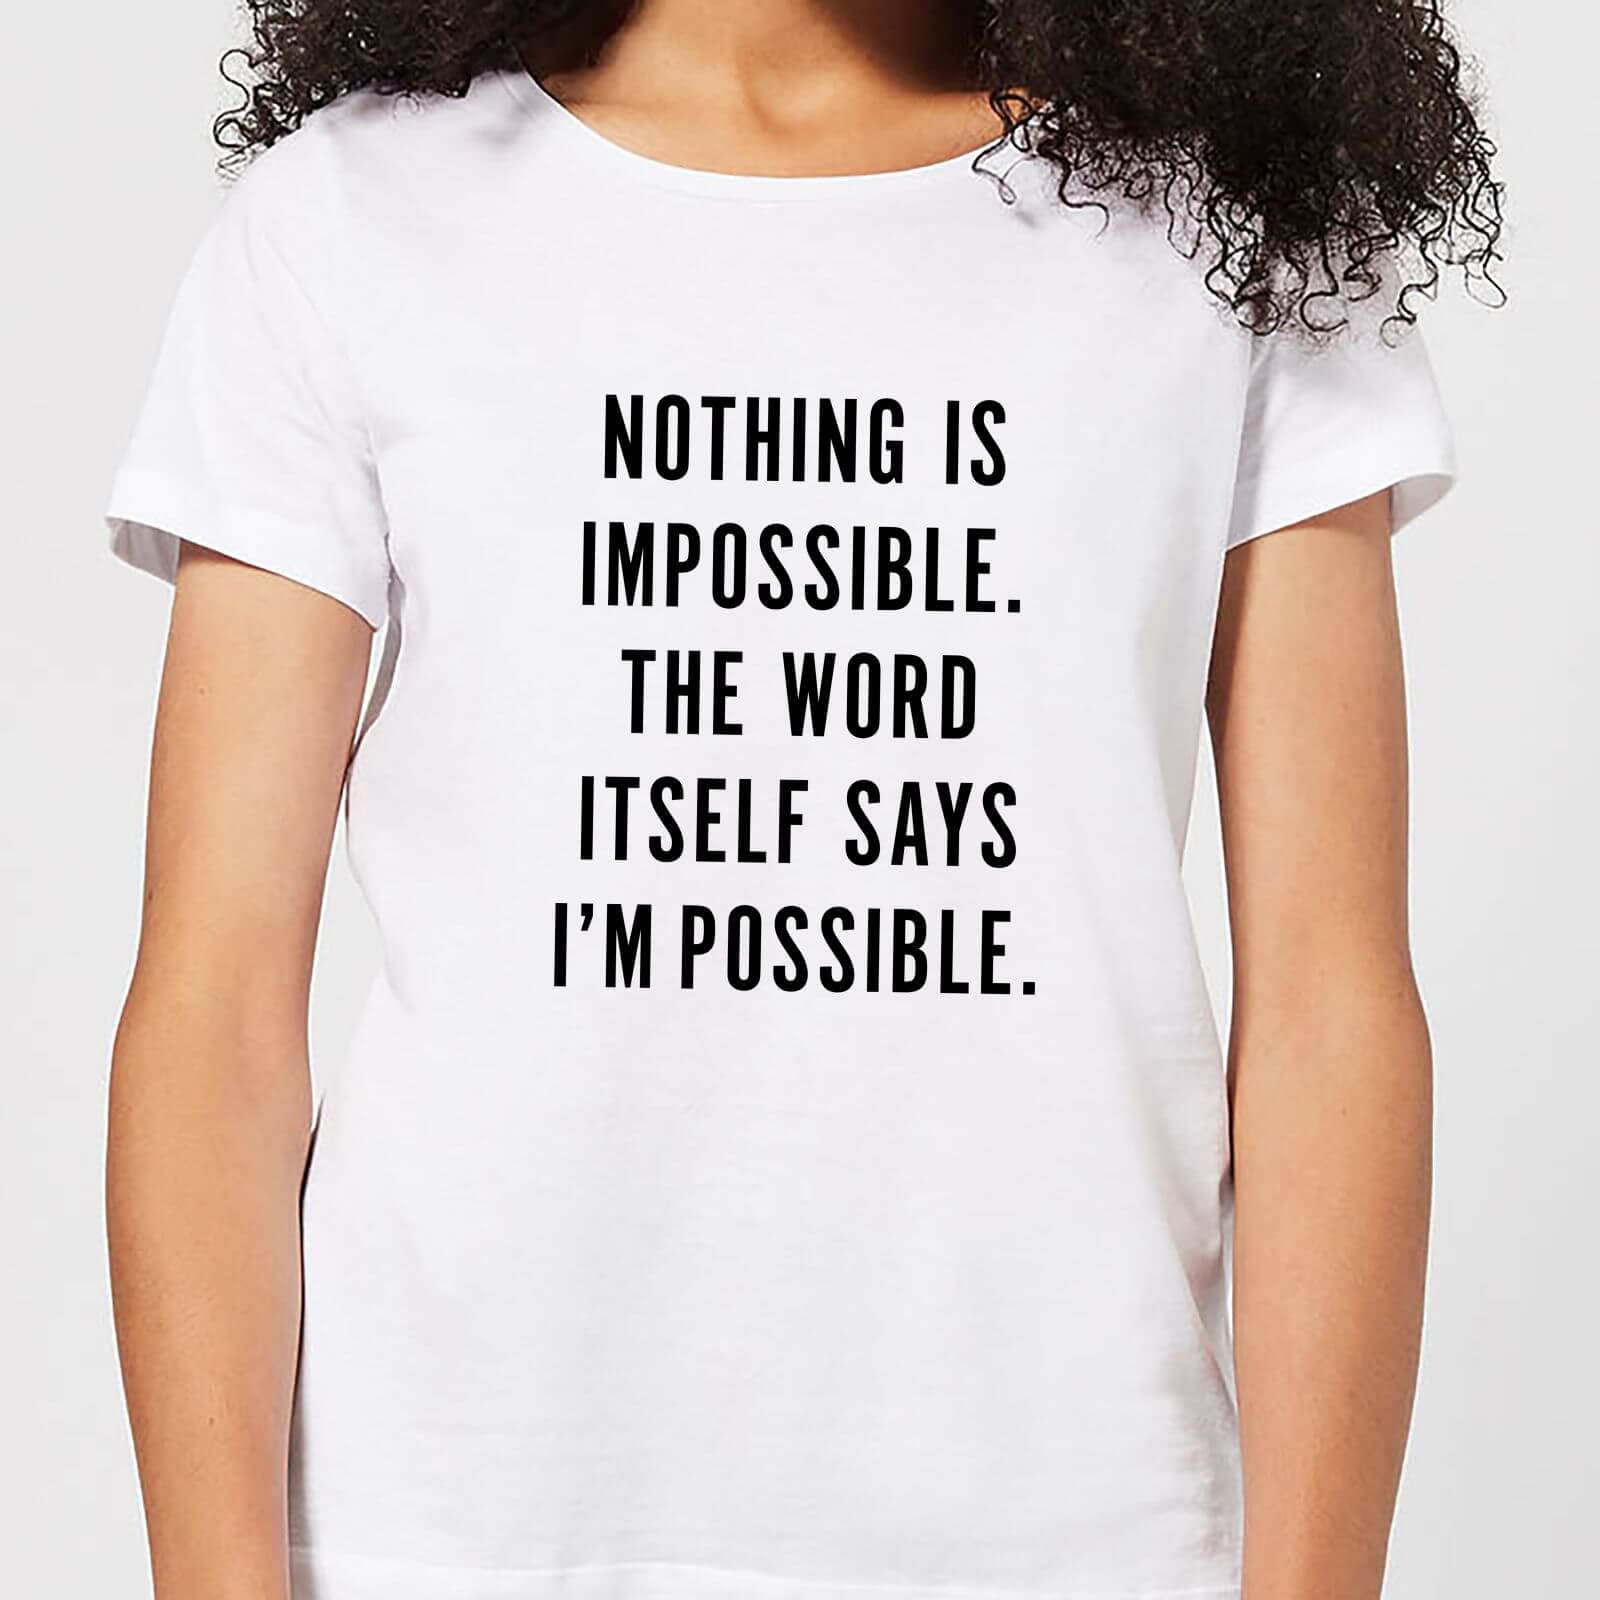 Nothing Is Impossible Women's T-Shirt - White - S - White